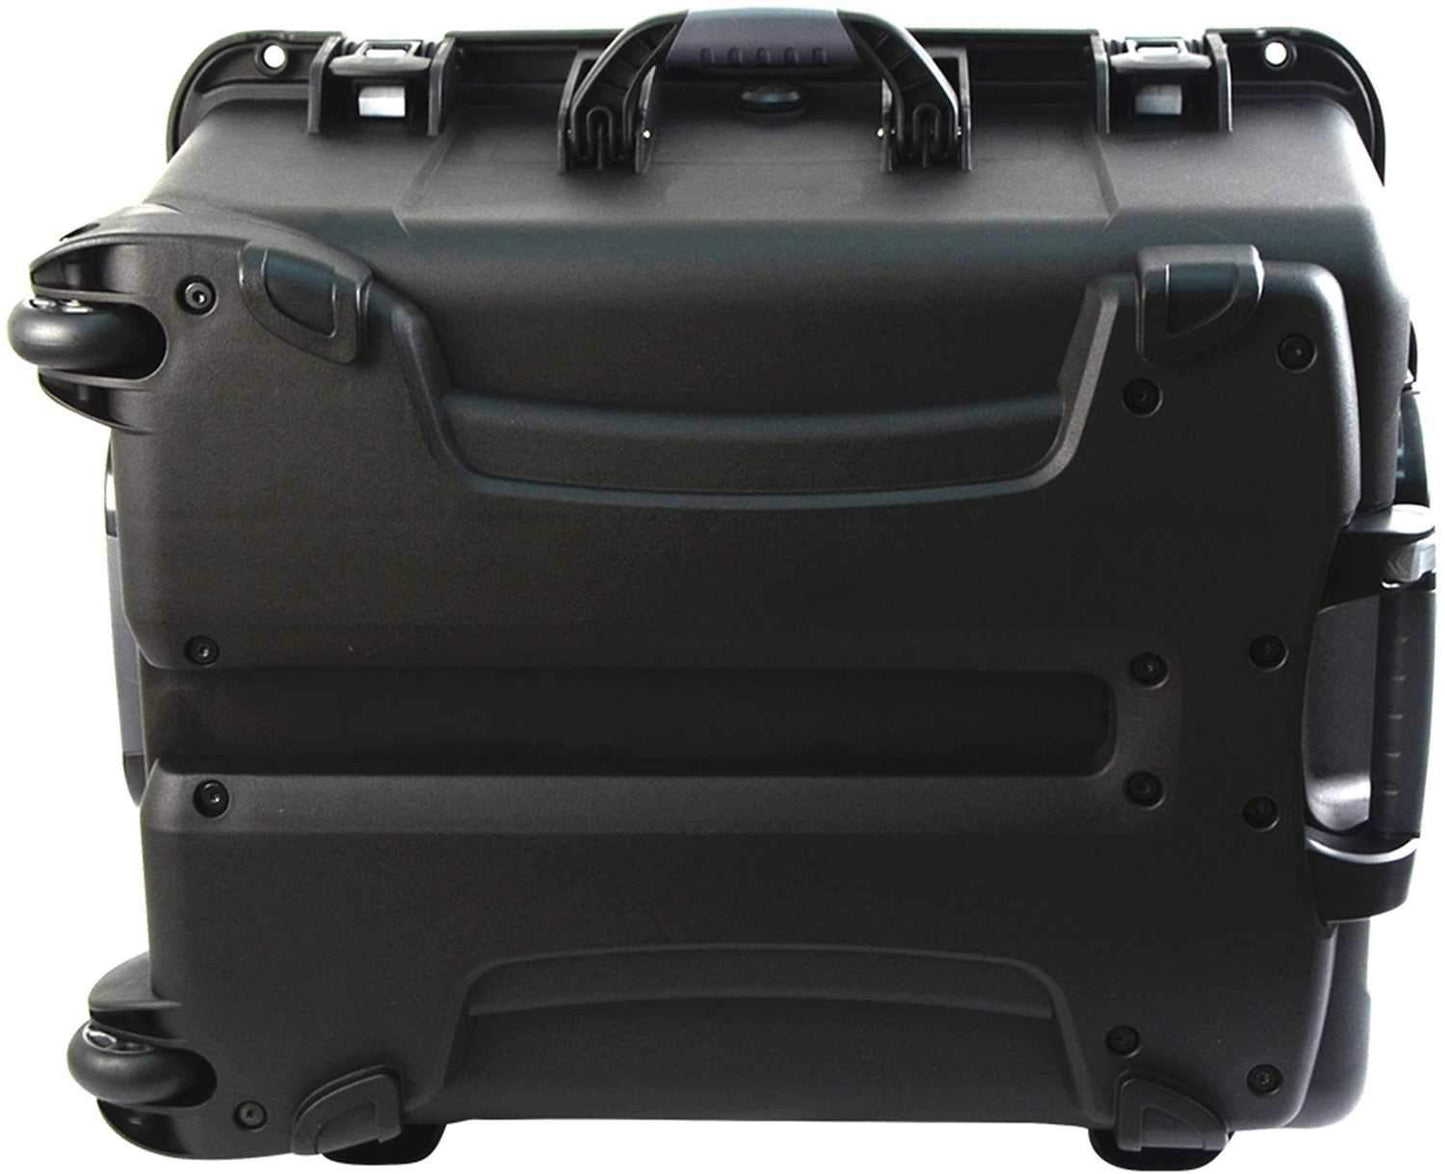 Gator GU-2217-13-WPNF Waterproof Utility Case - ProSound and Stage Lighting